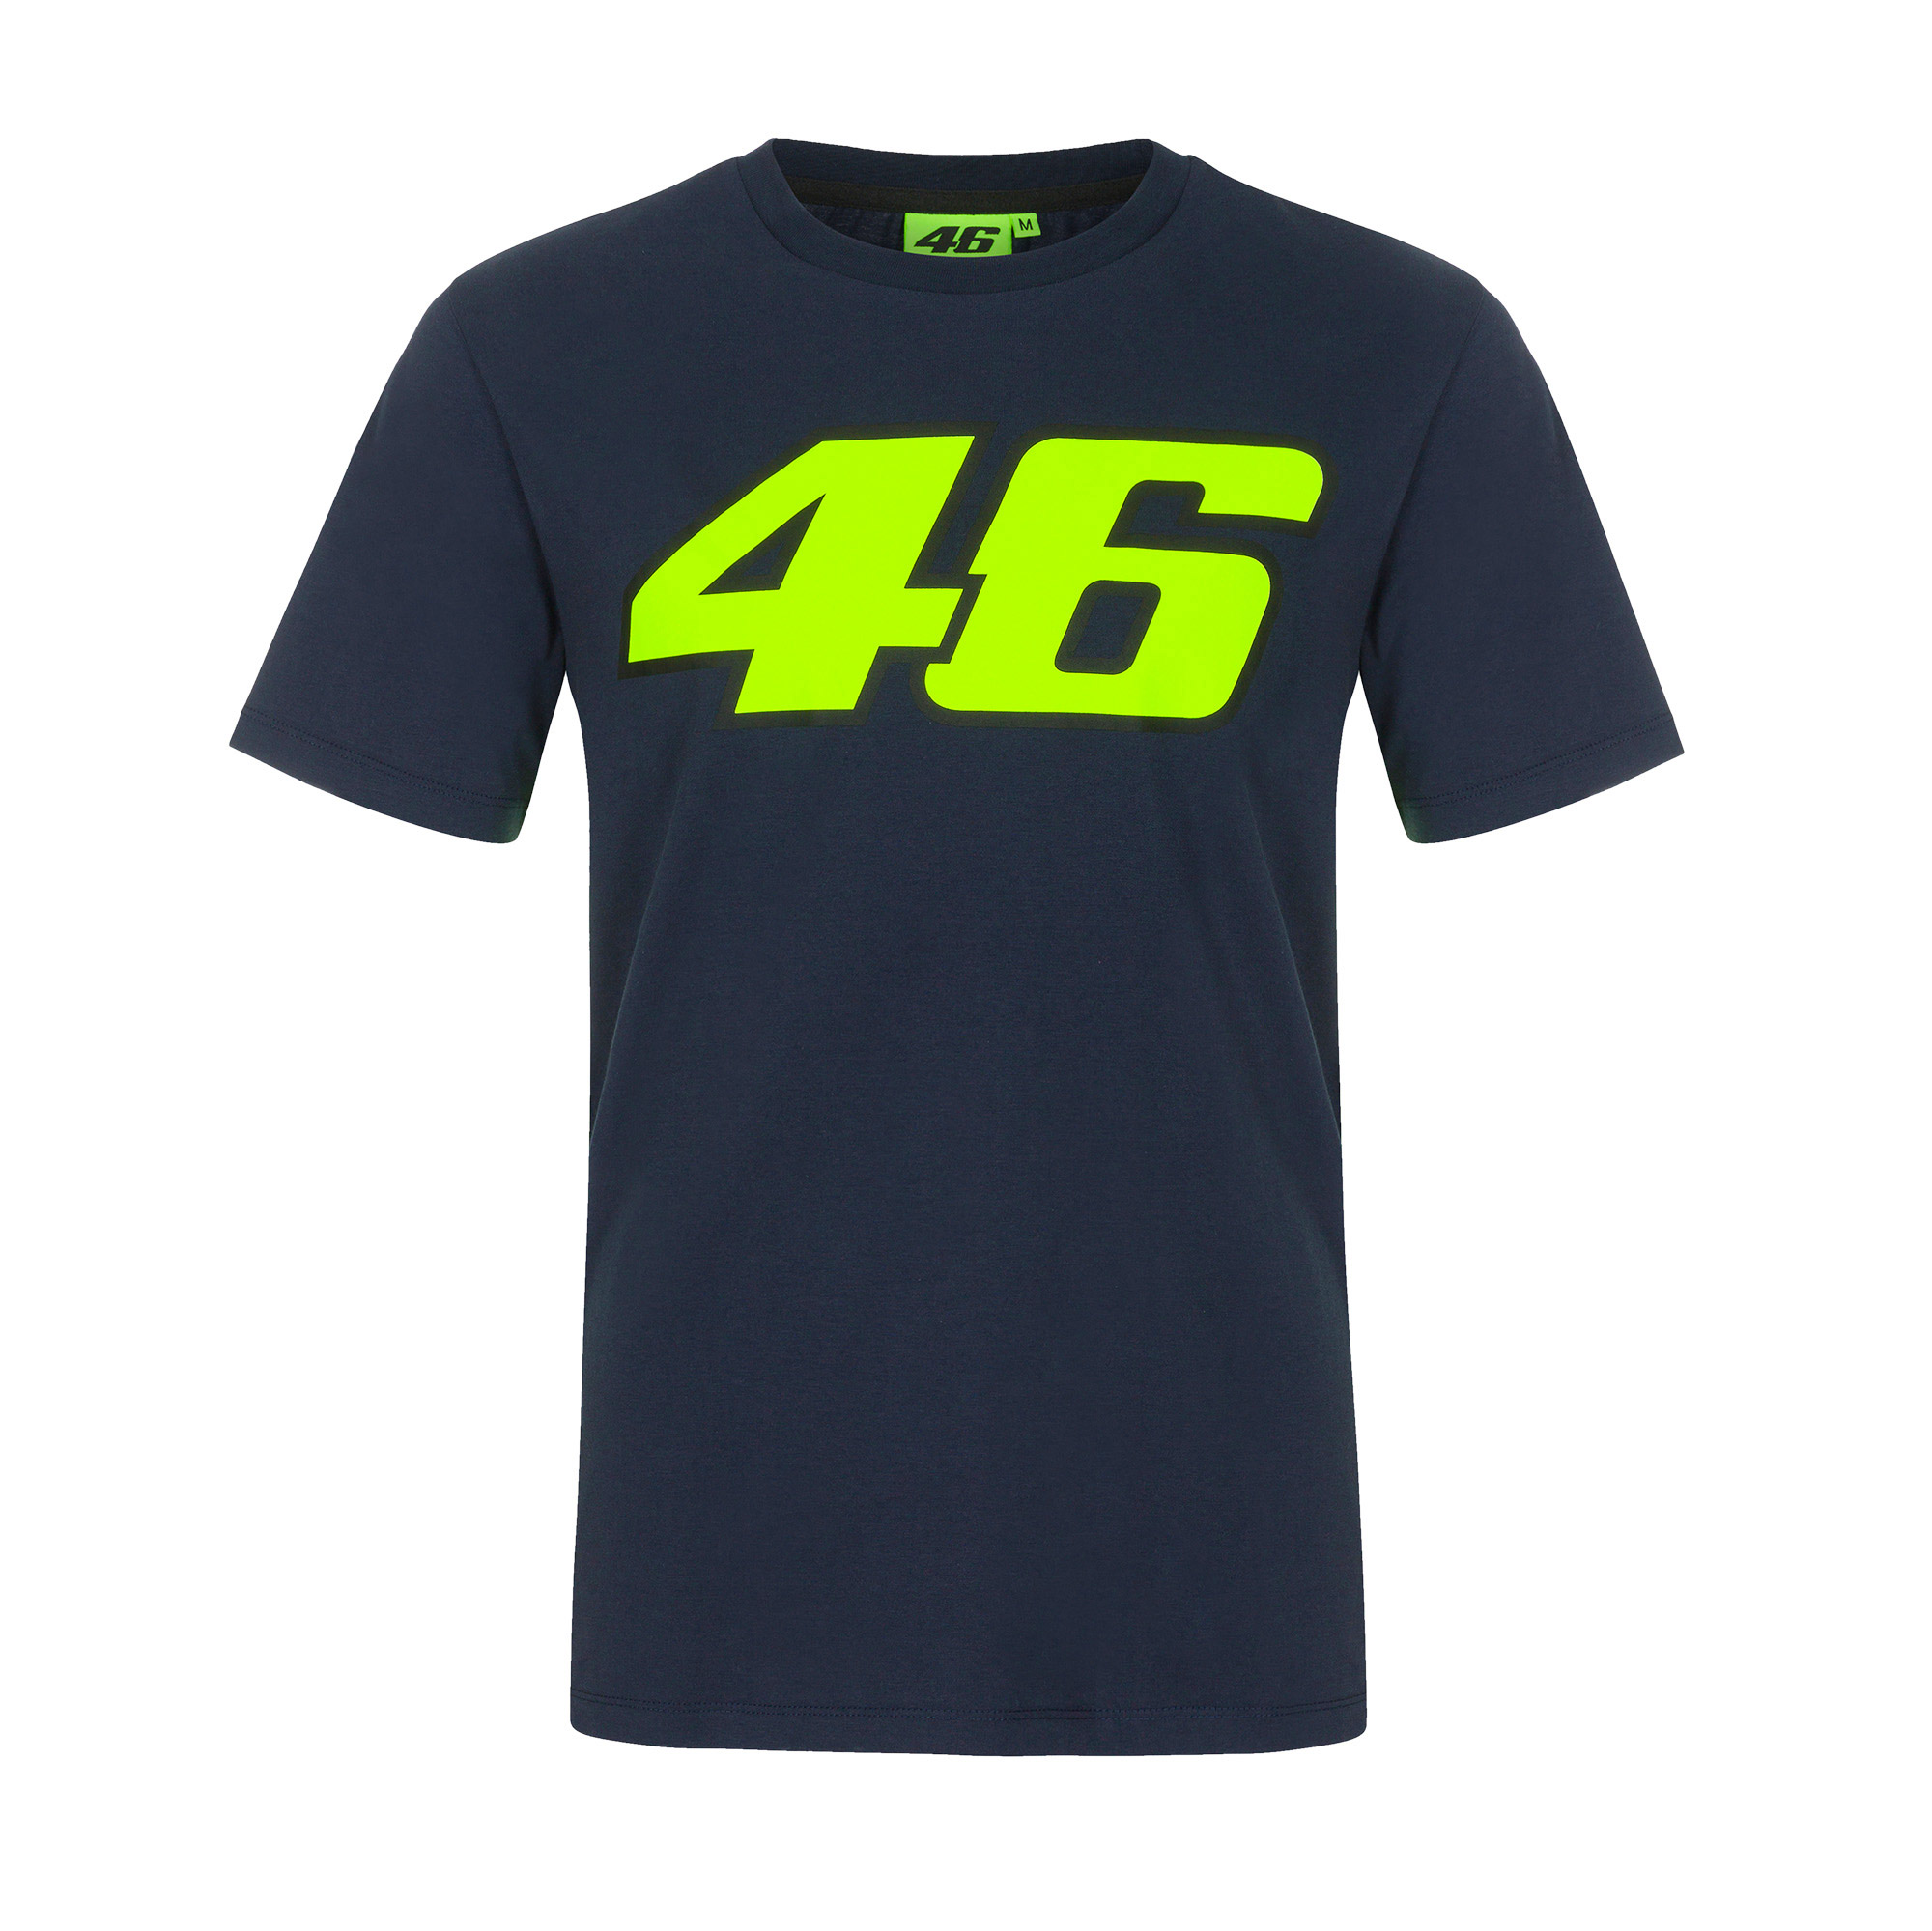 Valentino Rossi T-Shirt "46 The Doctor" - blue